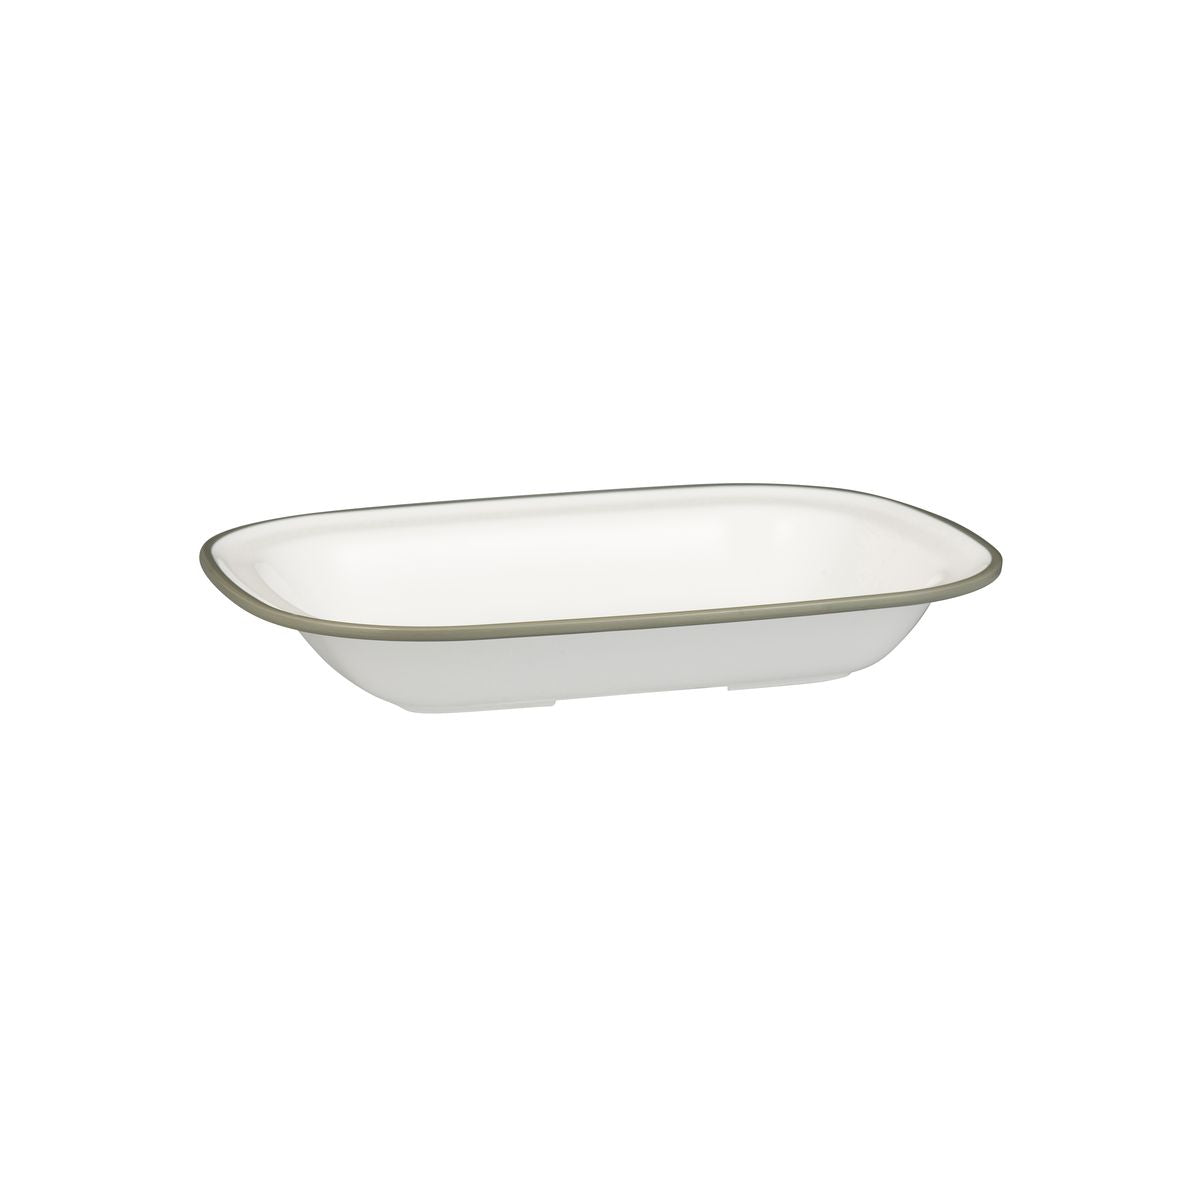 Rectangular Dish, 270 x 200 x 42mm, Melamine - White & Grey from Ryner Melamine. Sold in boxes of 12. Hospitality quality at wholesale price with The Flying Fork! 